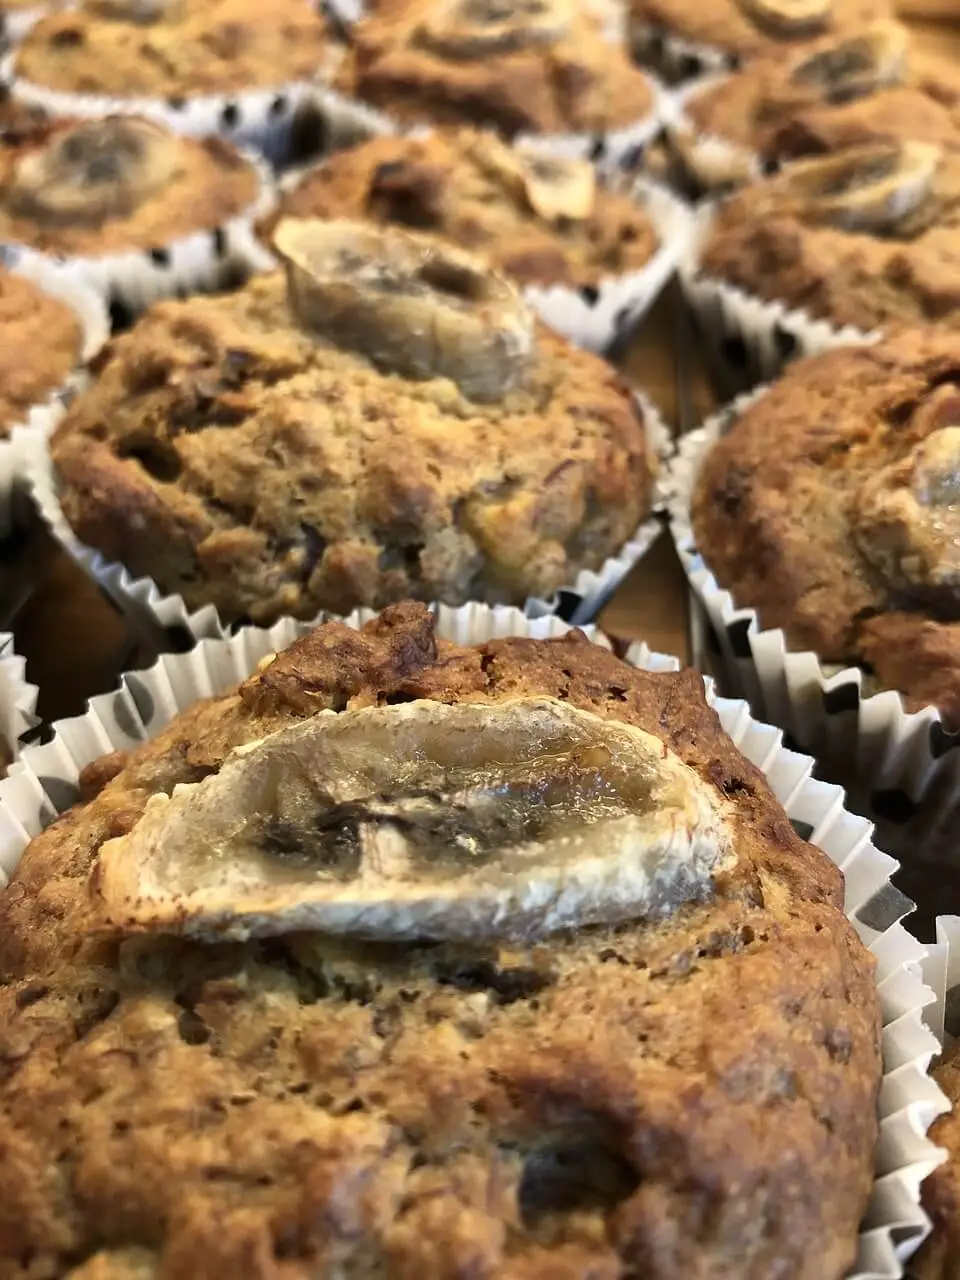 Discover the perfect Protein Banana Muffin Recipe for a healthy snack. Easy, delicious, and packed with nutrition for your active lifestyle